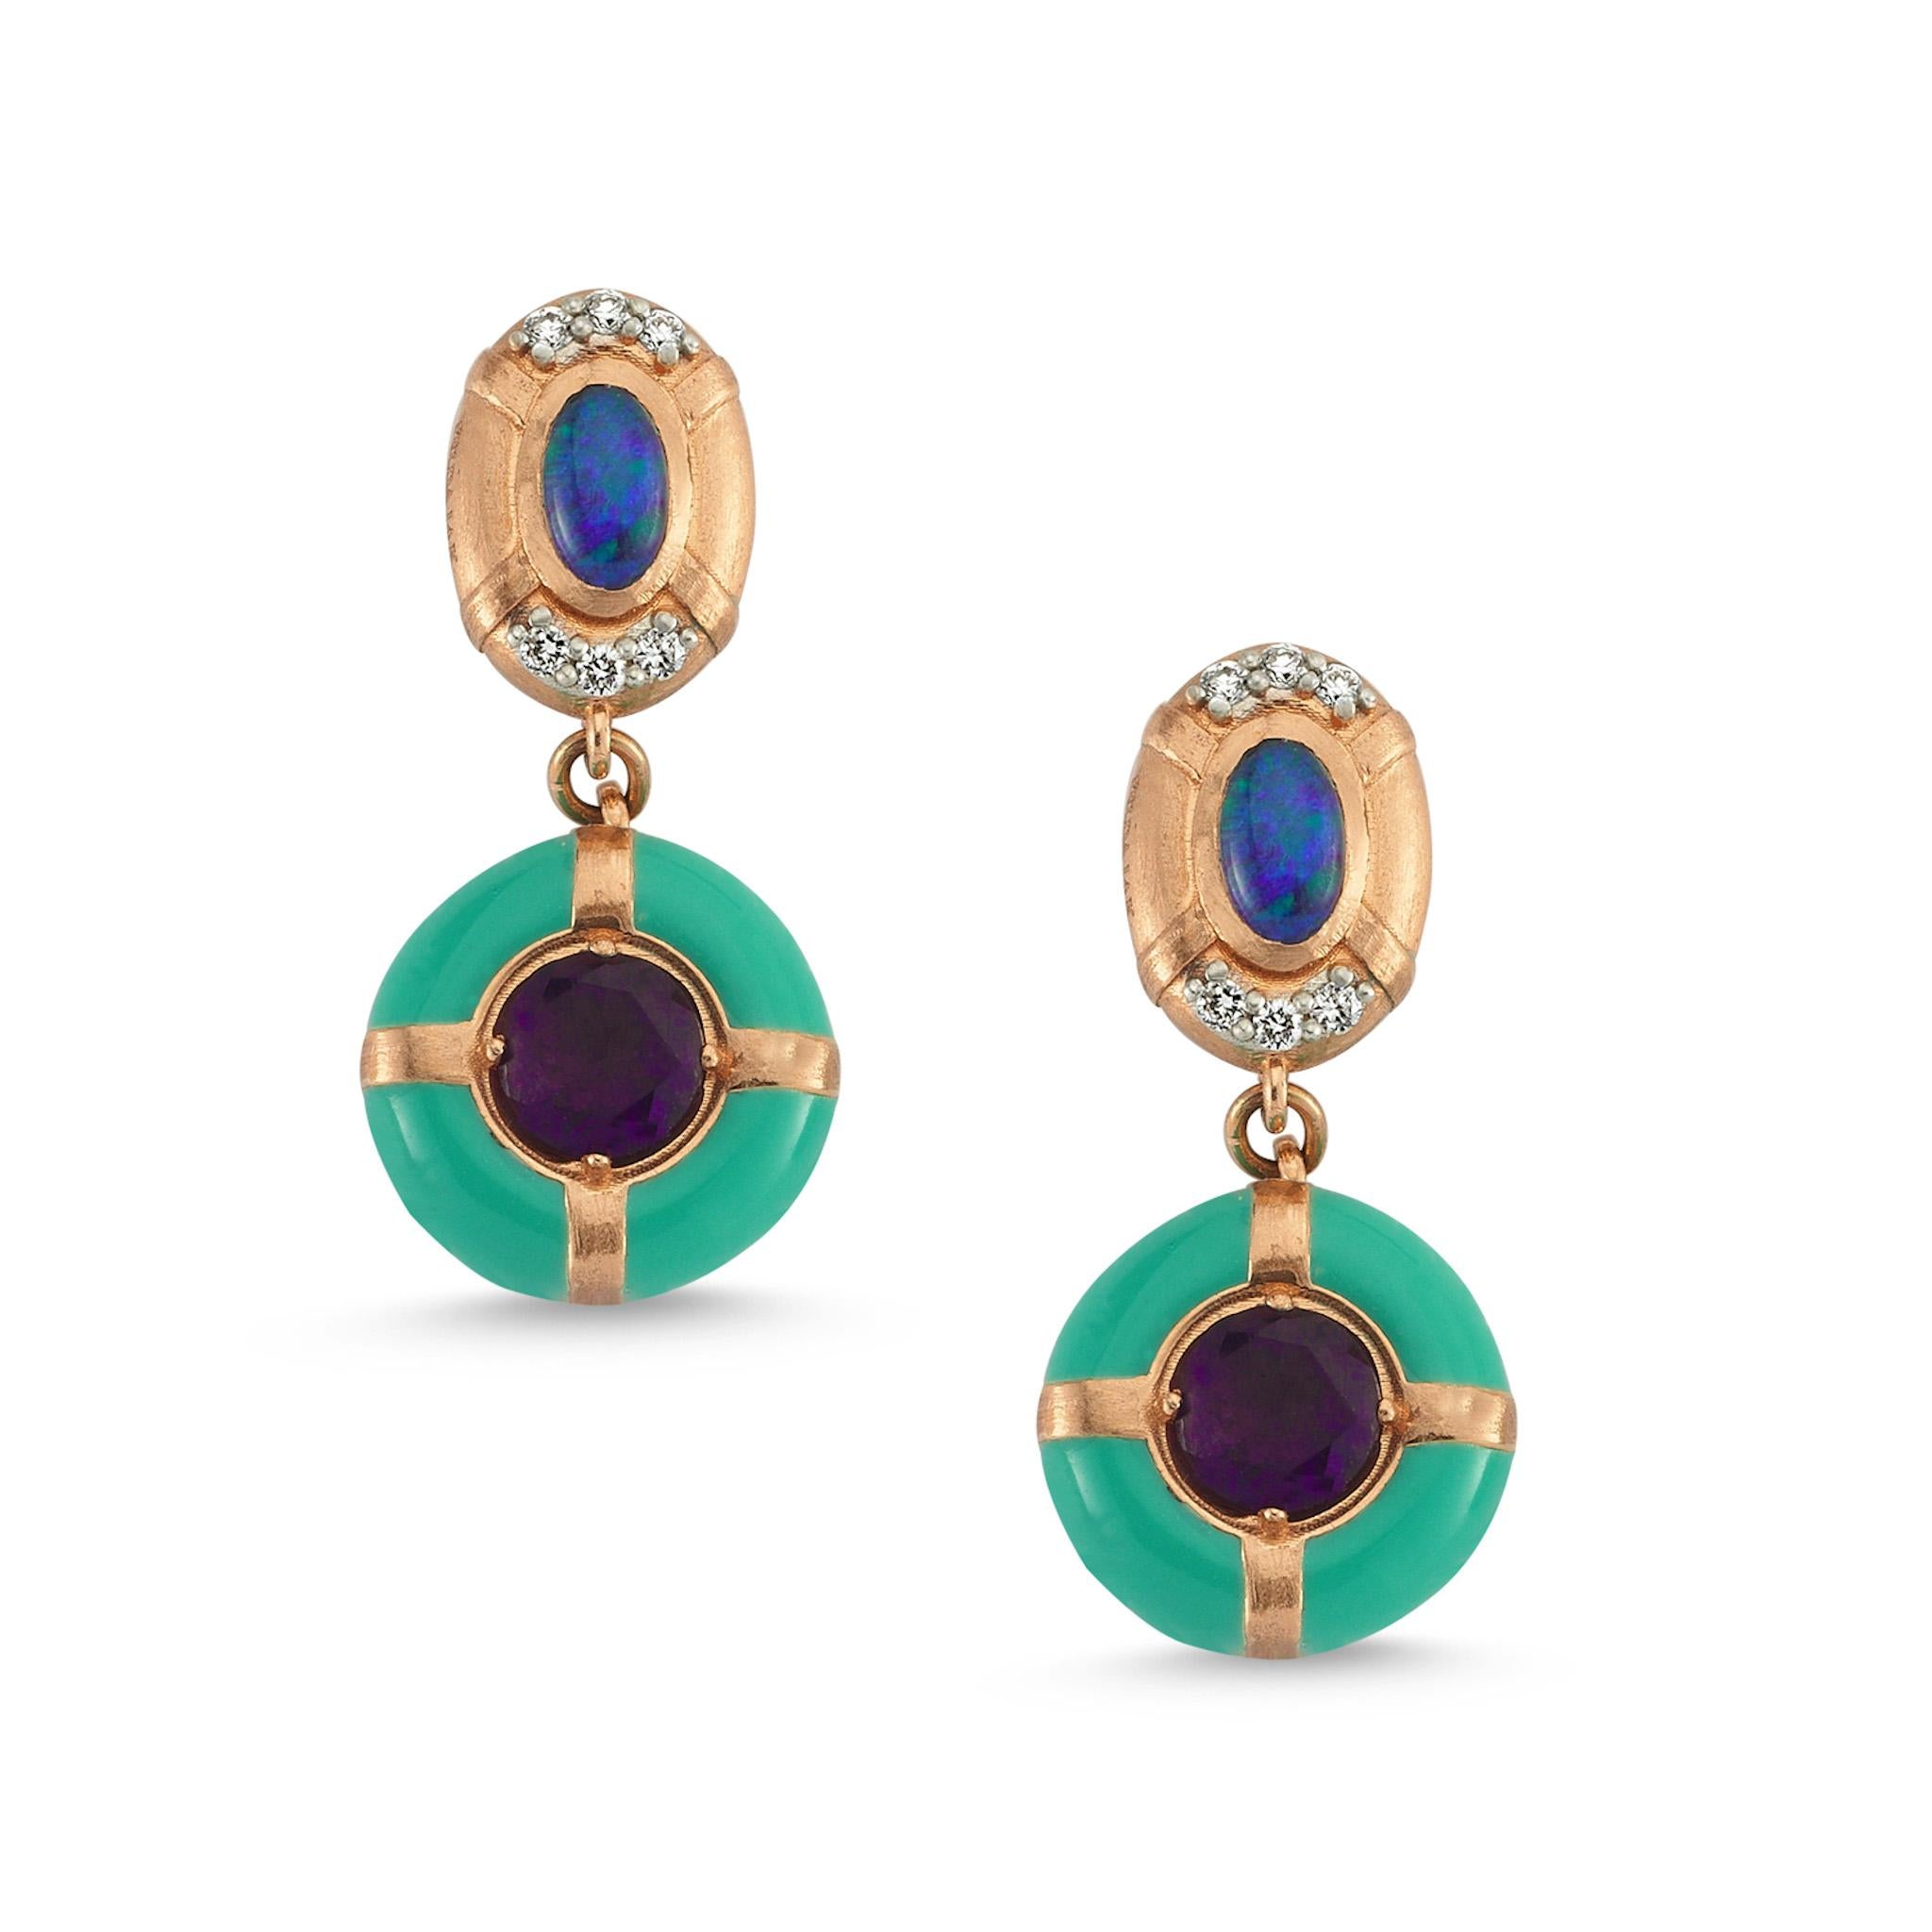 Maia 14k rose gold earrings with enamel & amethyst by Selda Jewellery

Additional Information:-
Collection: Treasures of the Sea Collection
14k Rose gold
0.09ct White diamond
0.15ct Blue opal
0.94ct Amethyst
Around the amethyst is turquoise enamel